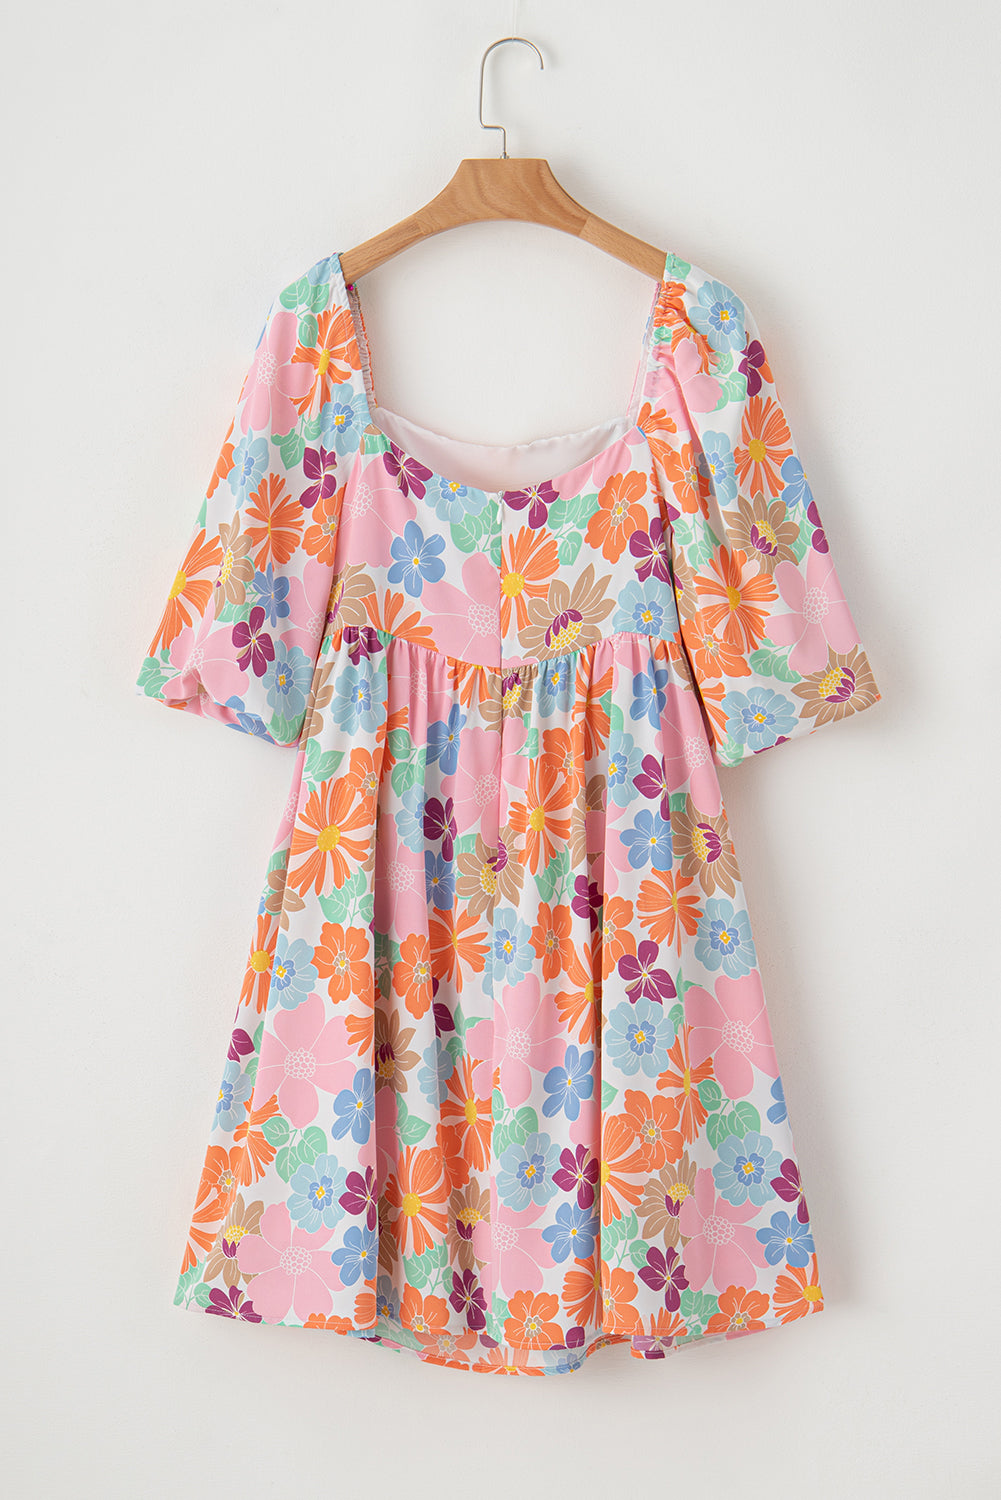 Blue Zone Planet |  Pink Summer Floral Square Neck Puff Sleeve Babydoll Dress Blue Zone Planet